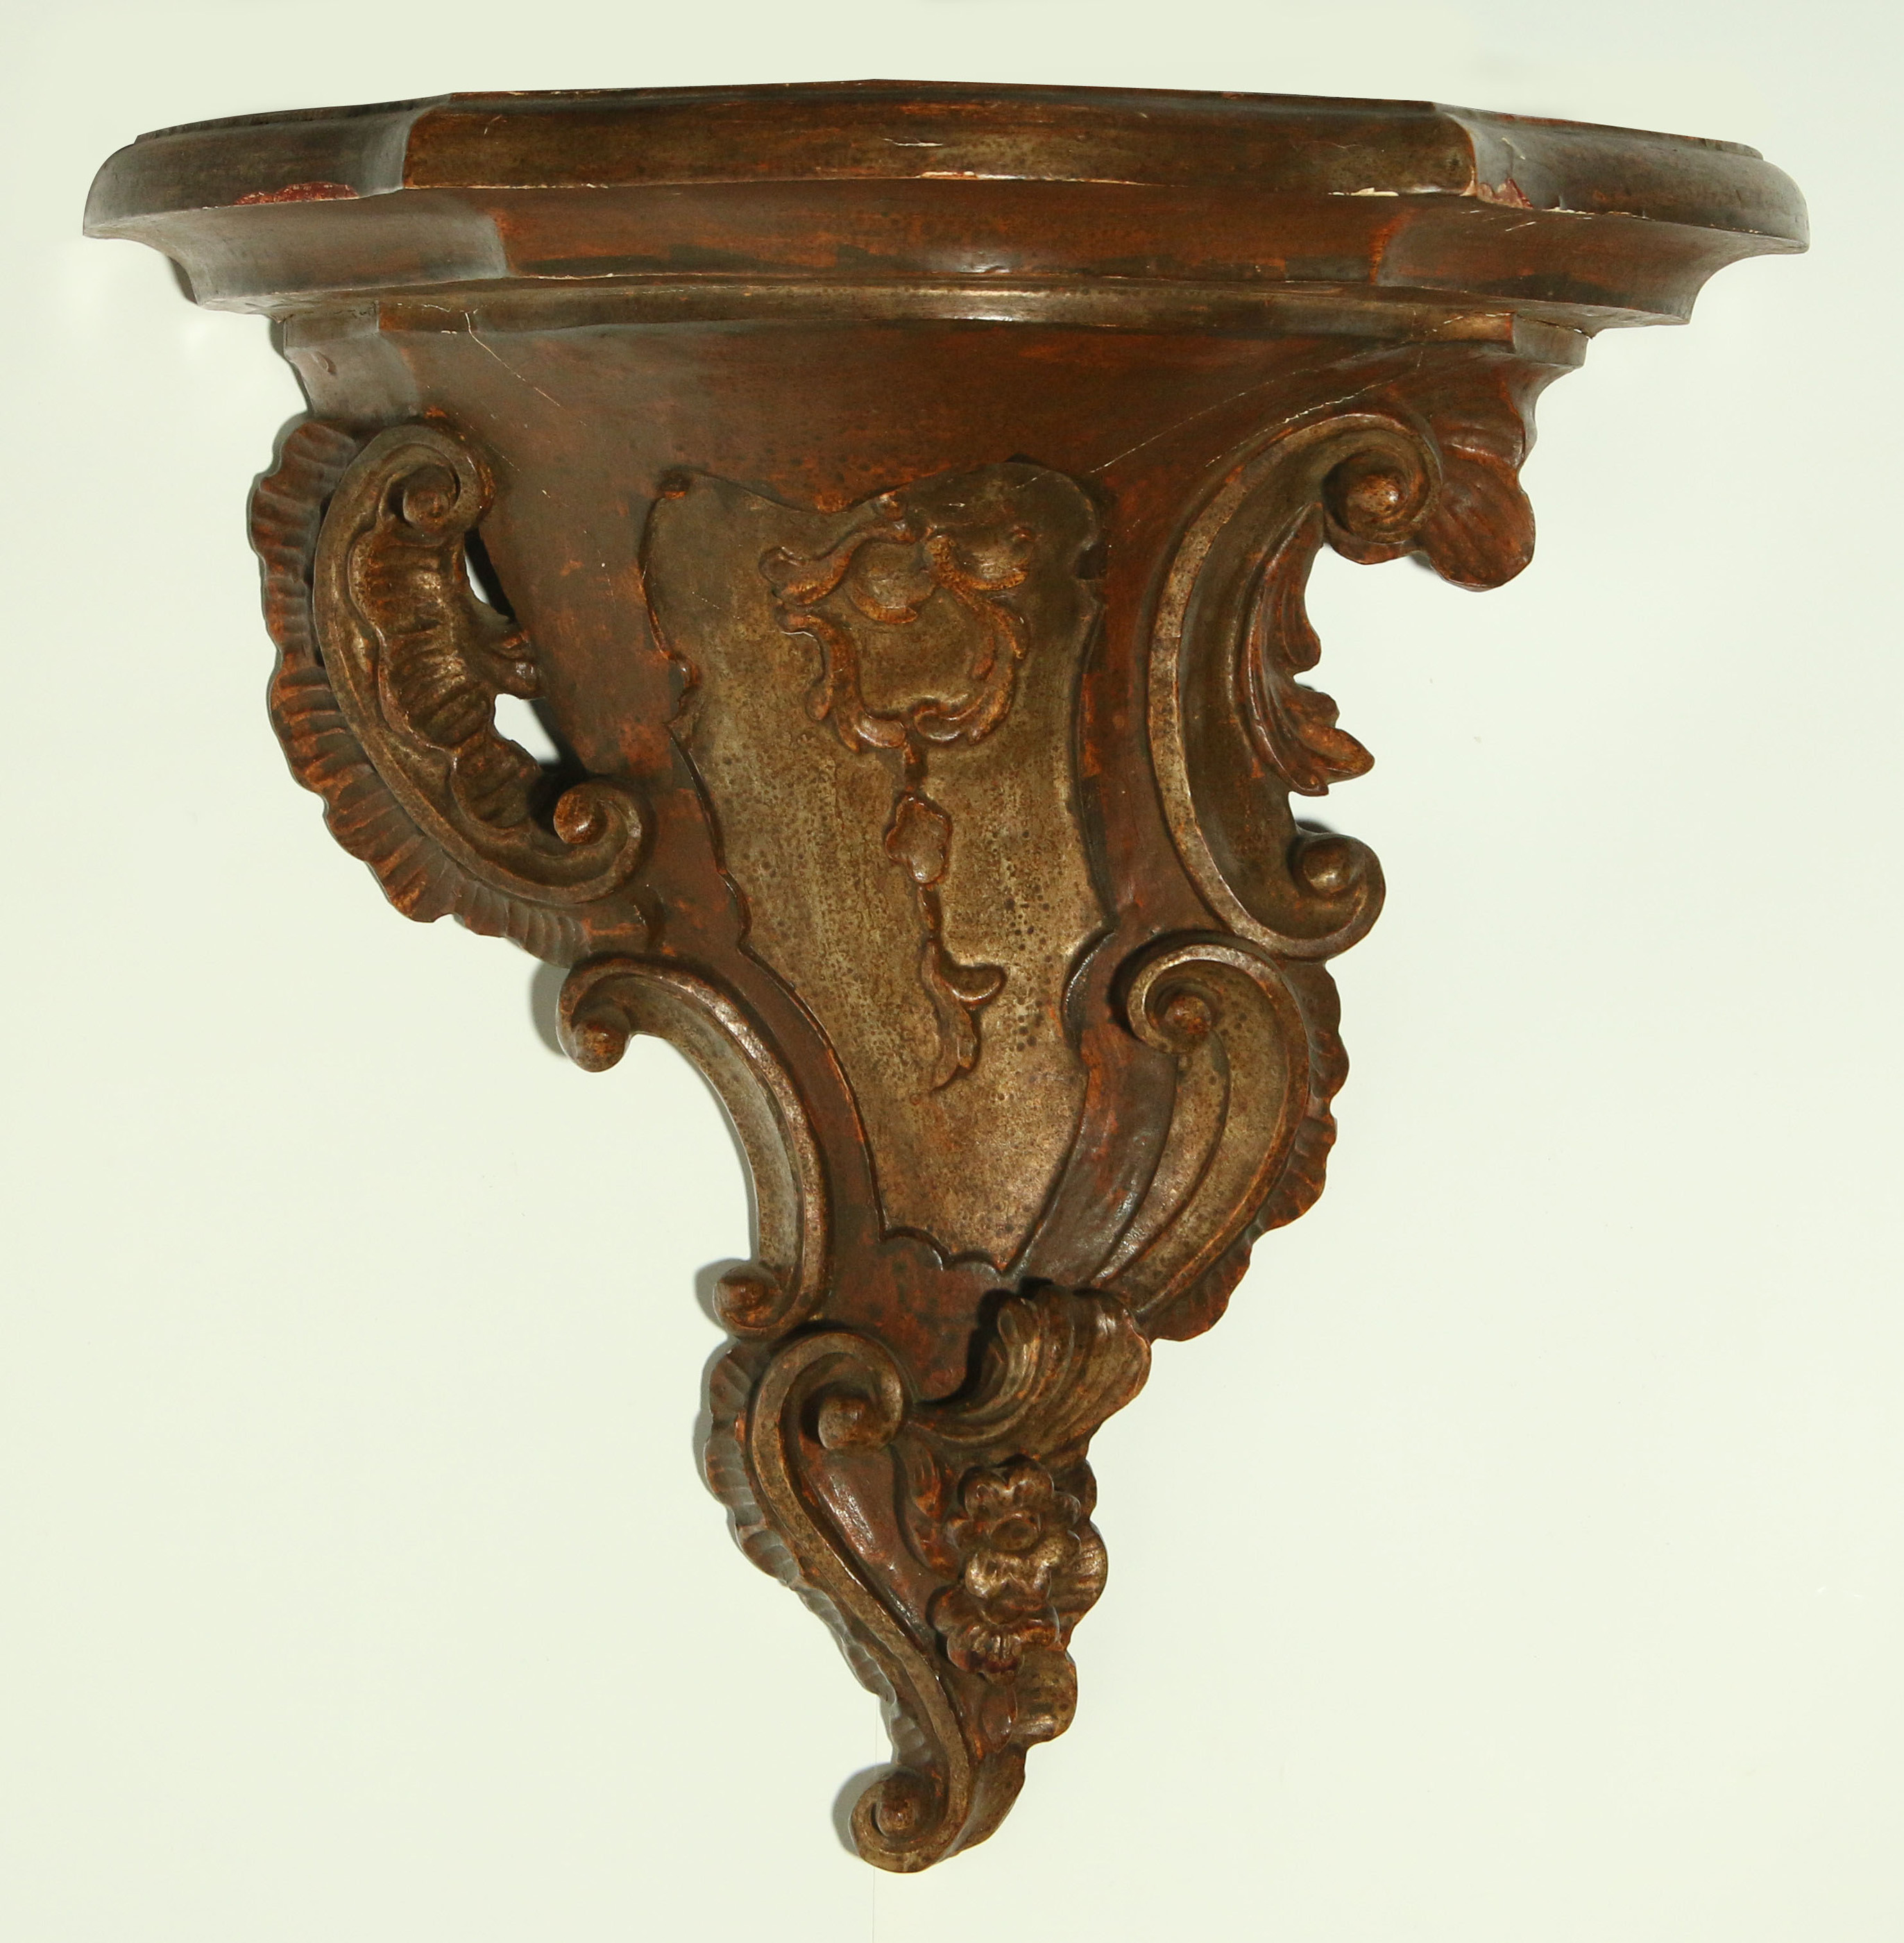 A ROCOCO STYLE CARVED AND GESSOED WOOD WALL SHELF